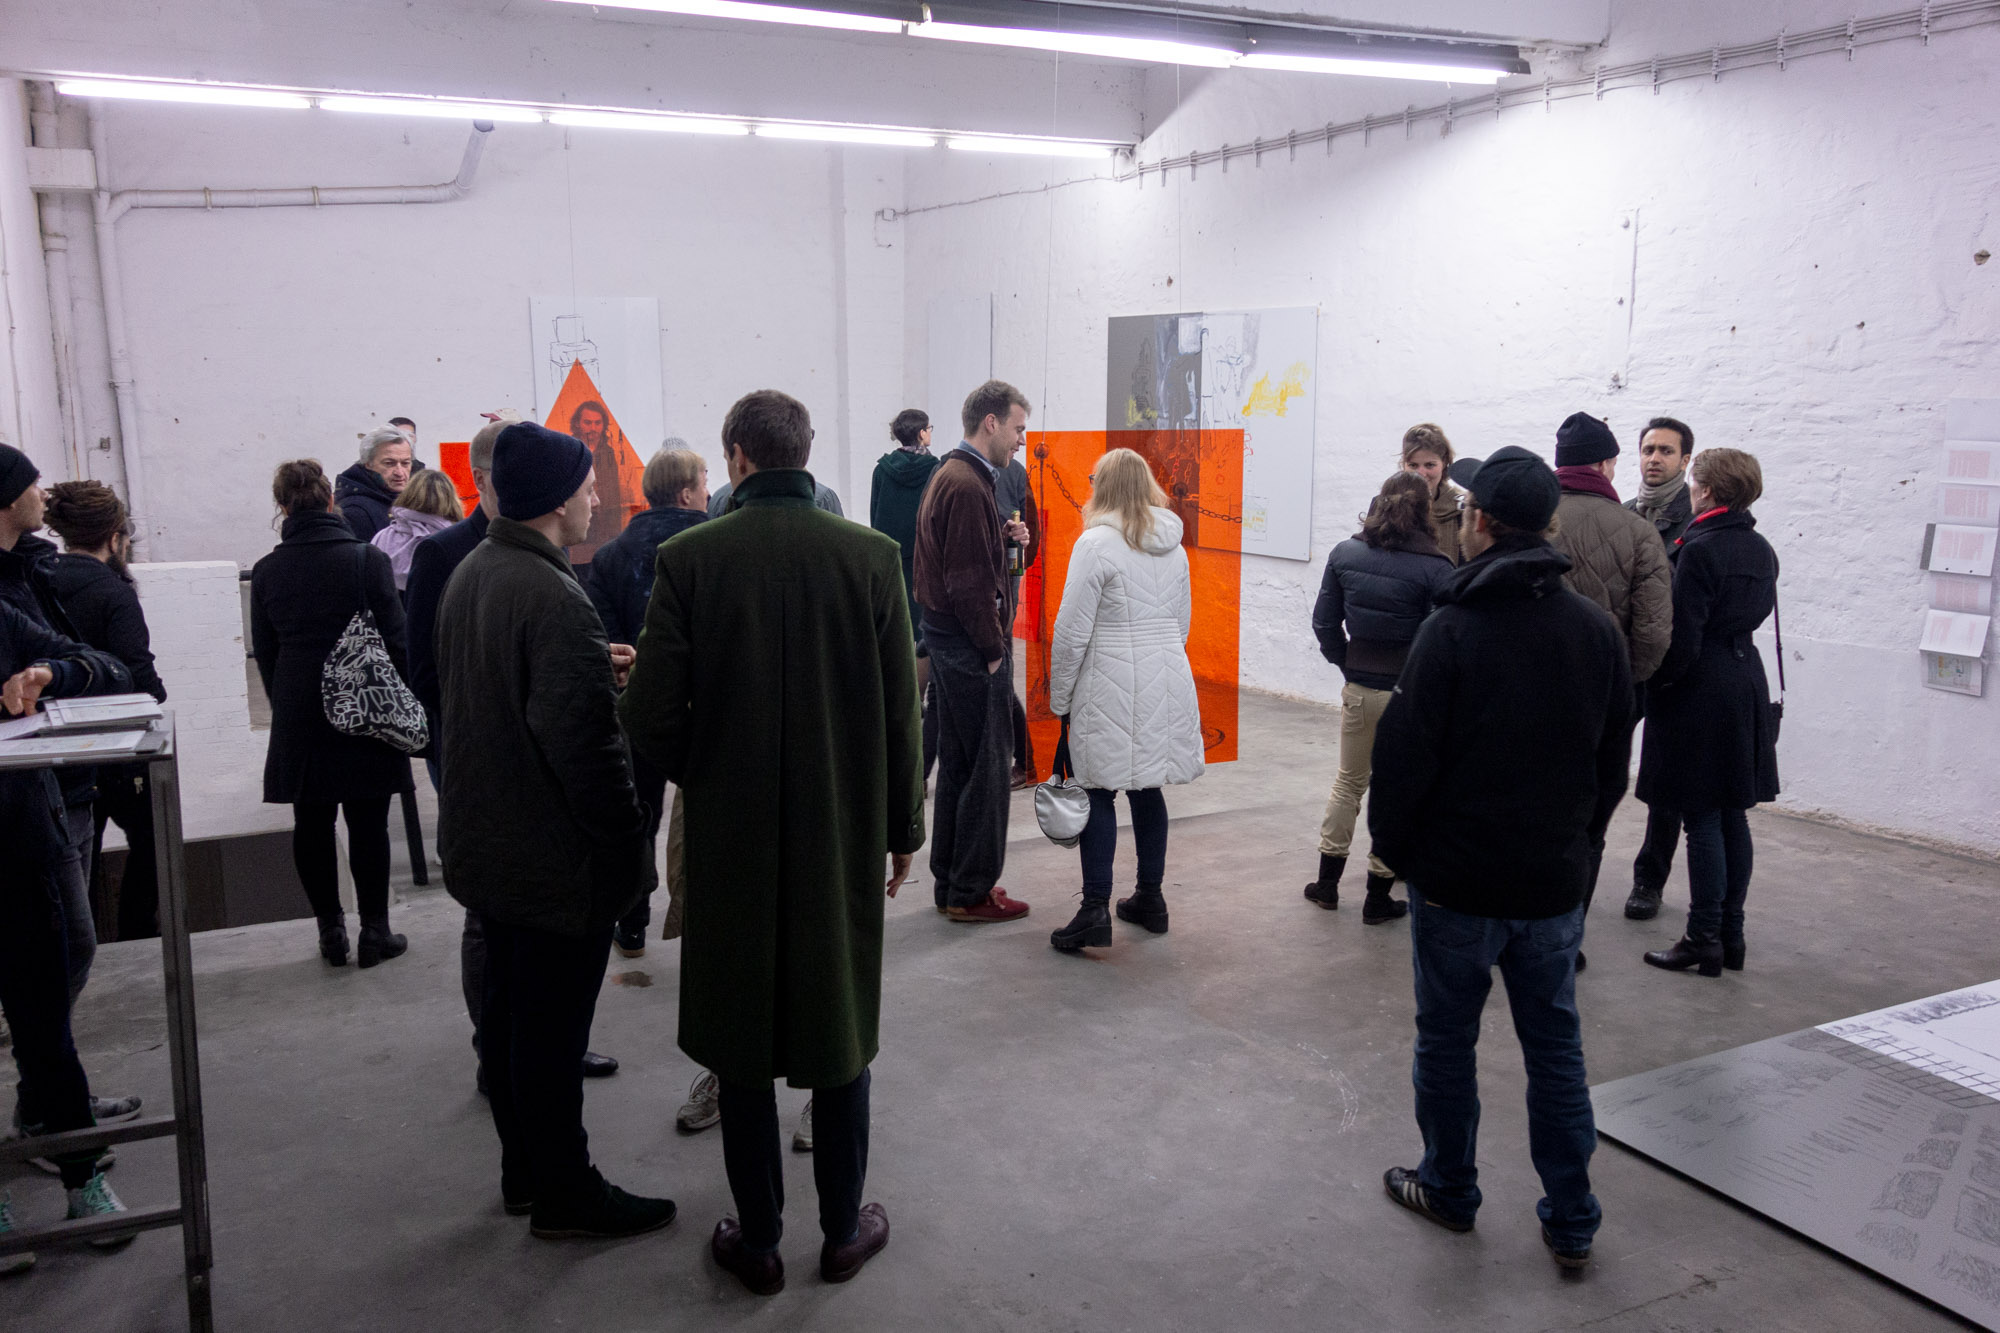 COURTROOM by MAXIMILIANE BAUMGARTNER + ALEX WISSEL - Opening - 17.11.2017 Studio For Artistic Research Maximiliane Baumgartner Alex Wissel Düsseldorf